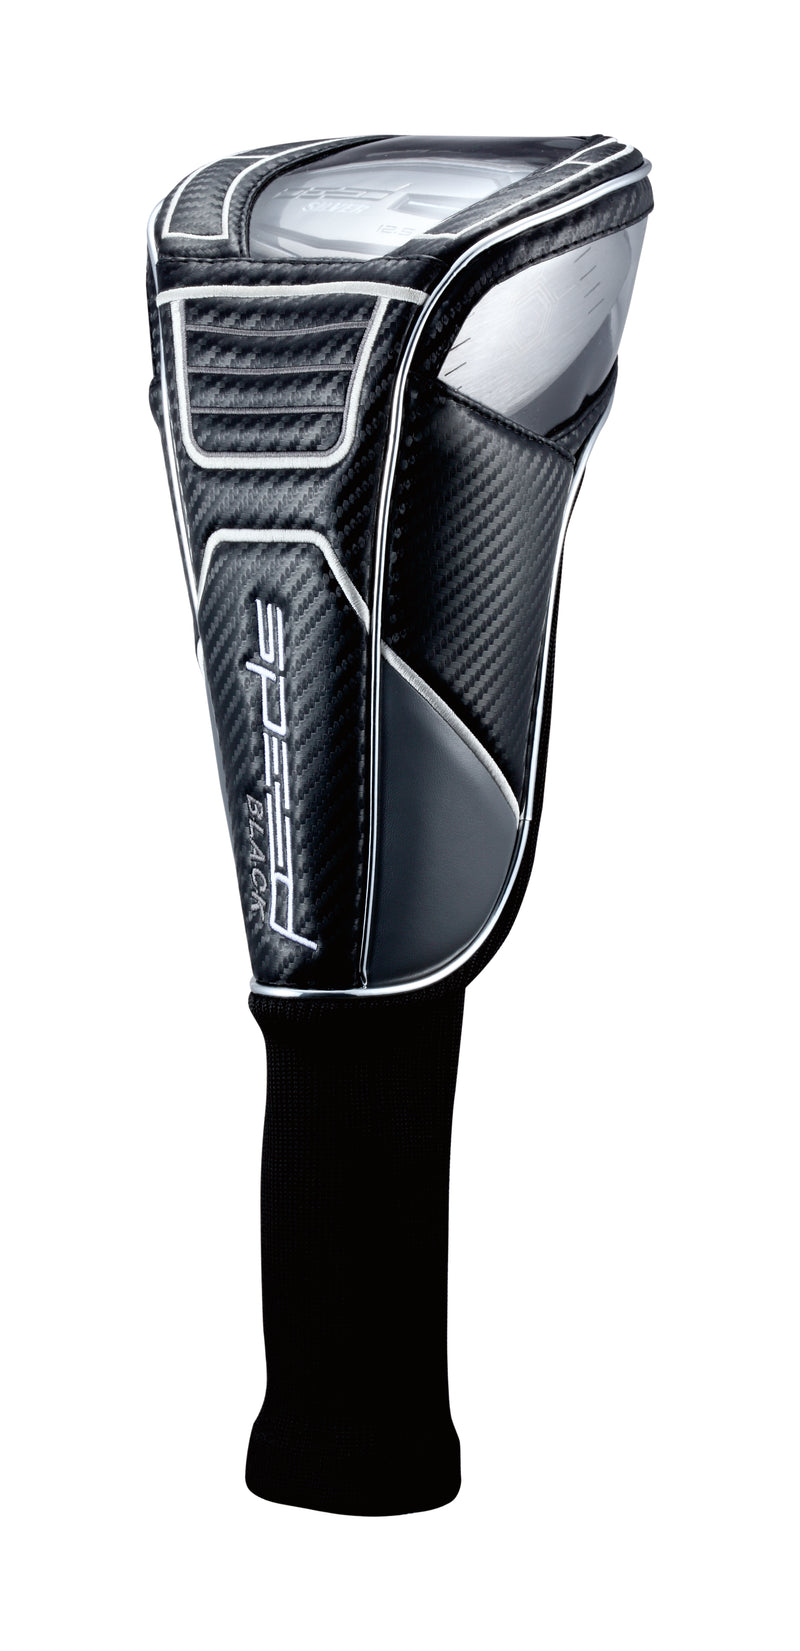 Power Titanium 460CC Golf Driver – Launch Your Drives Farther with Best Fit Technology